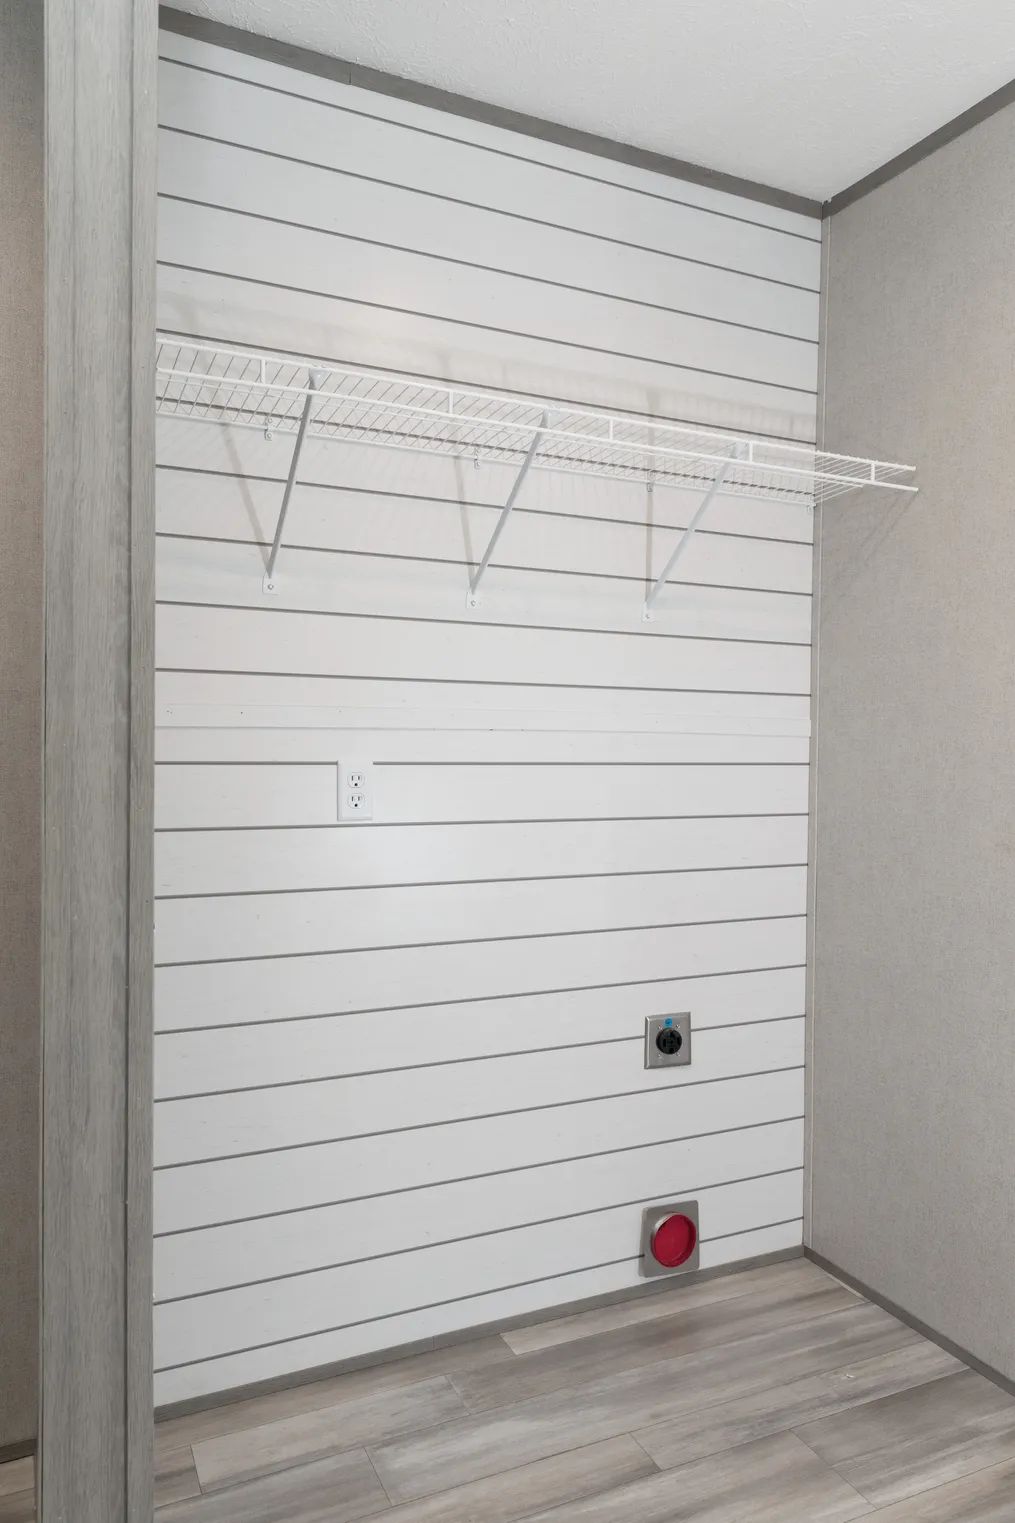 The BLAZER 66 F Utility Room. This Manufactured Mobile Home features 3 bedrooms and 2 baths.